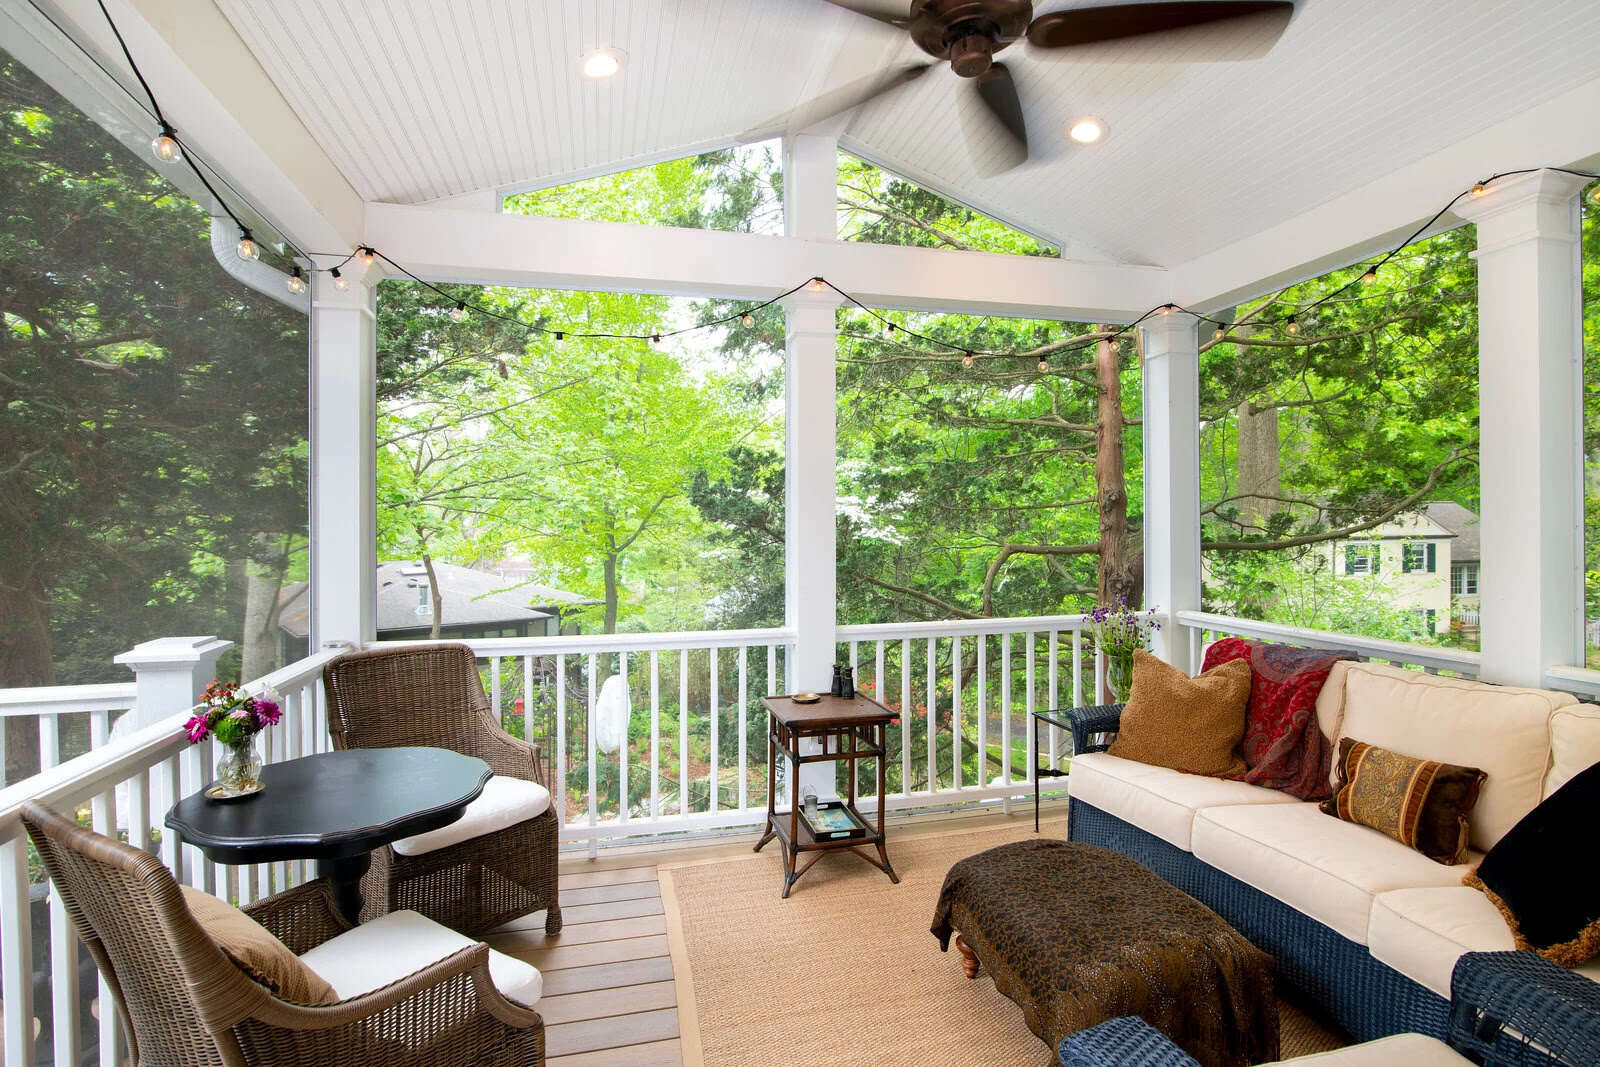 How Much Does A Screened-In Porch Cost